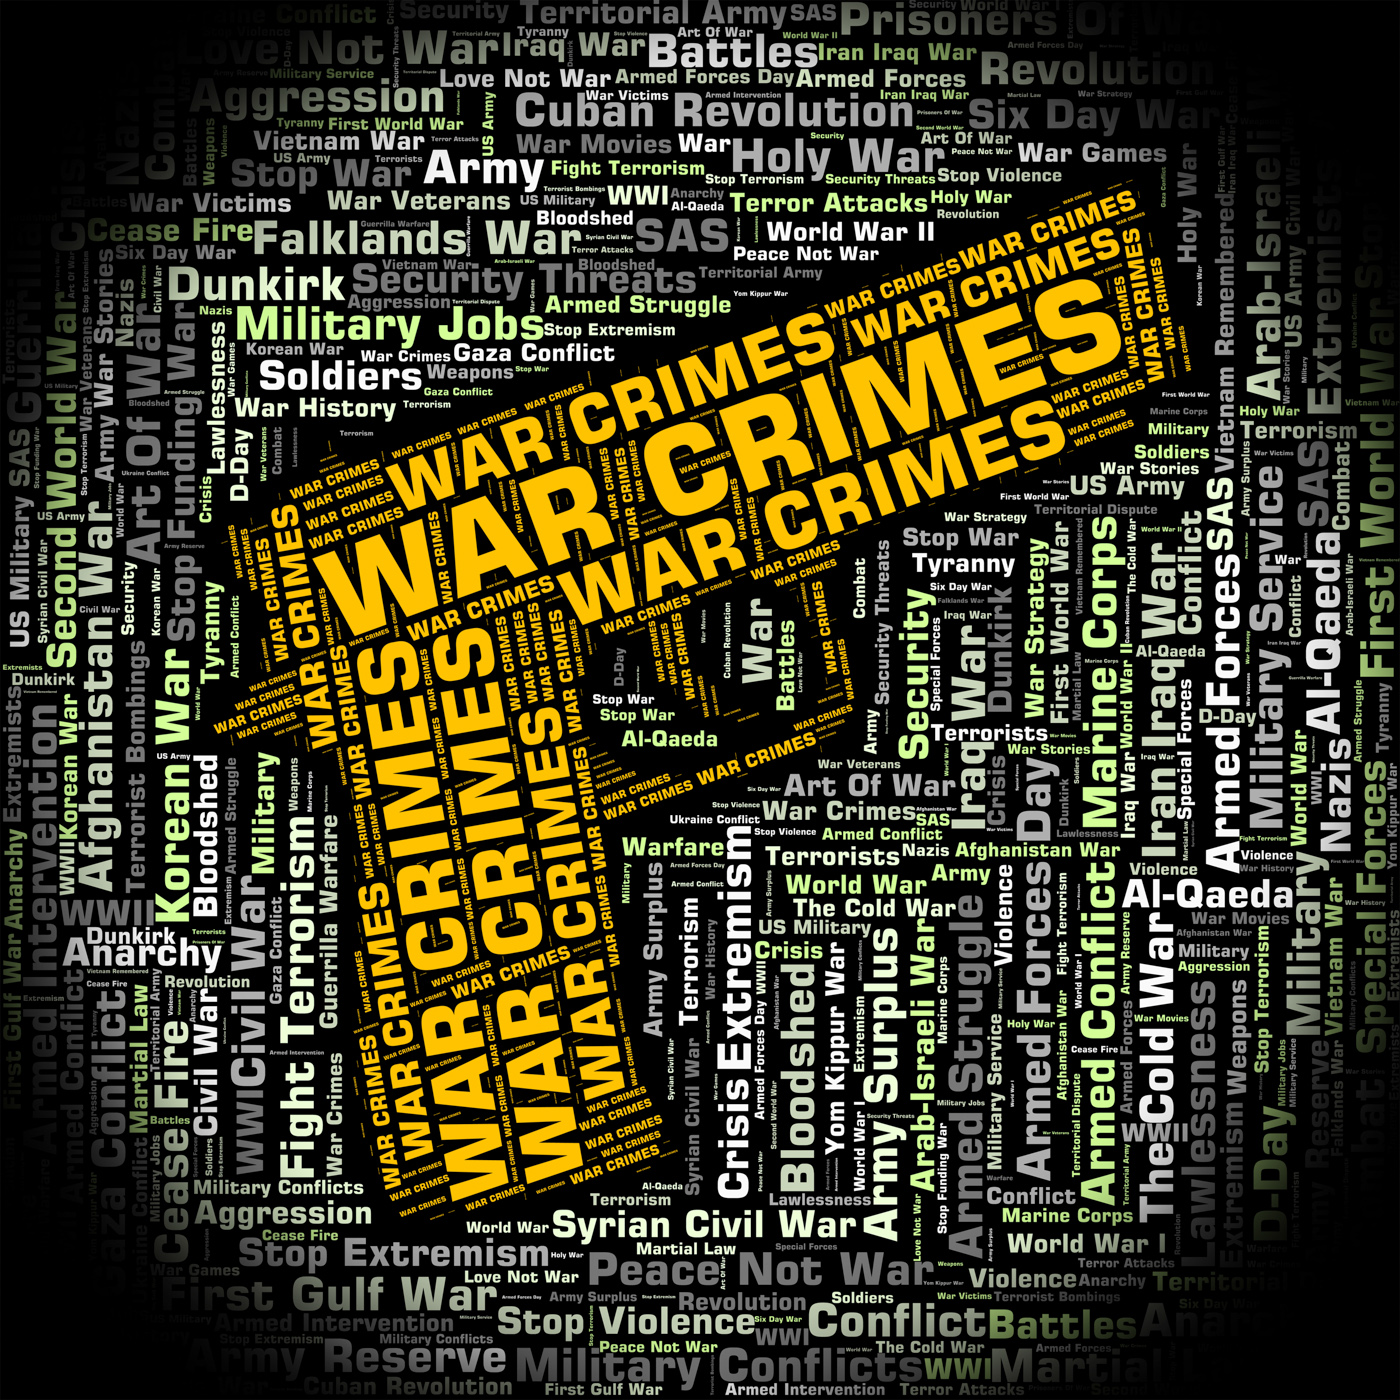 War crimes represents illegal act and battles photo